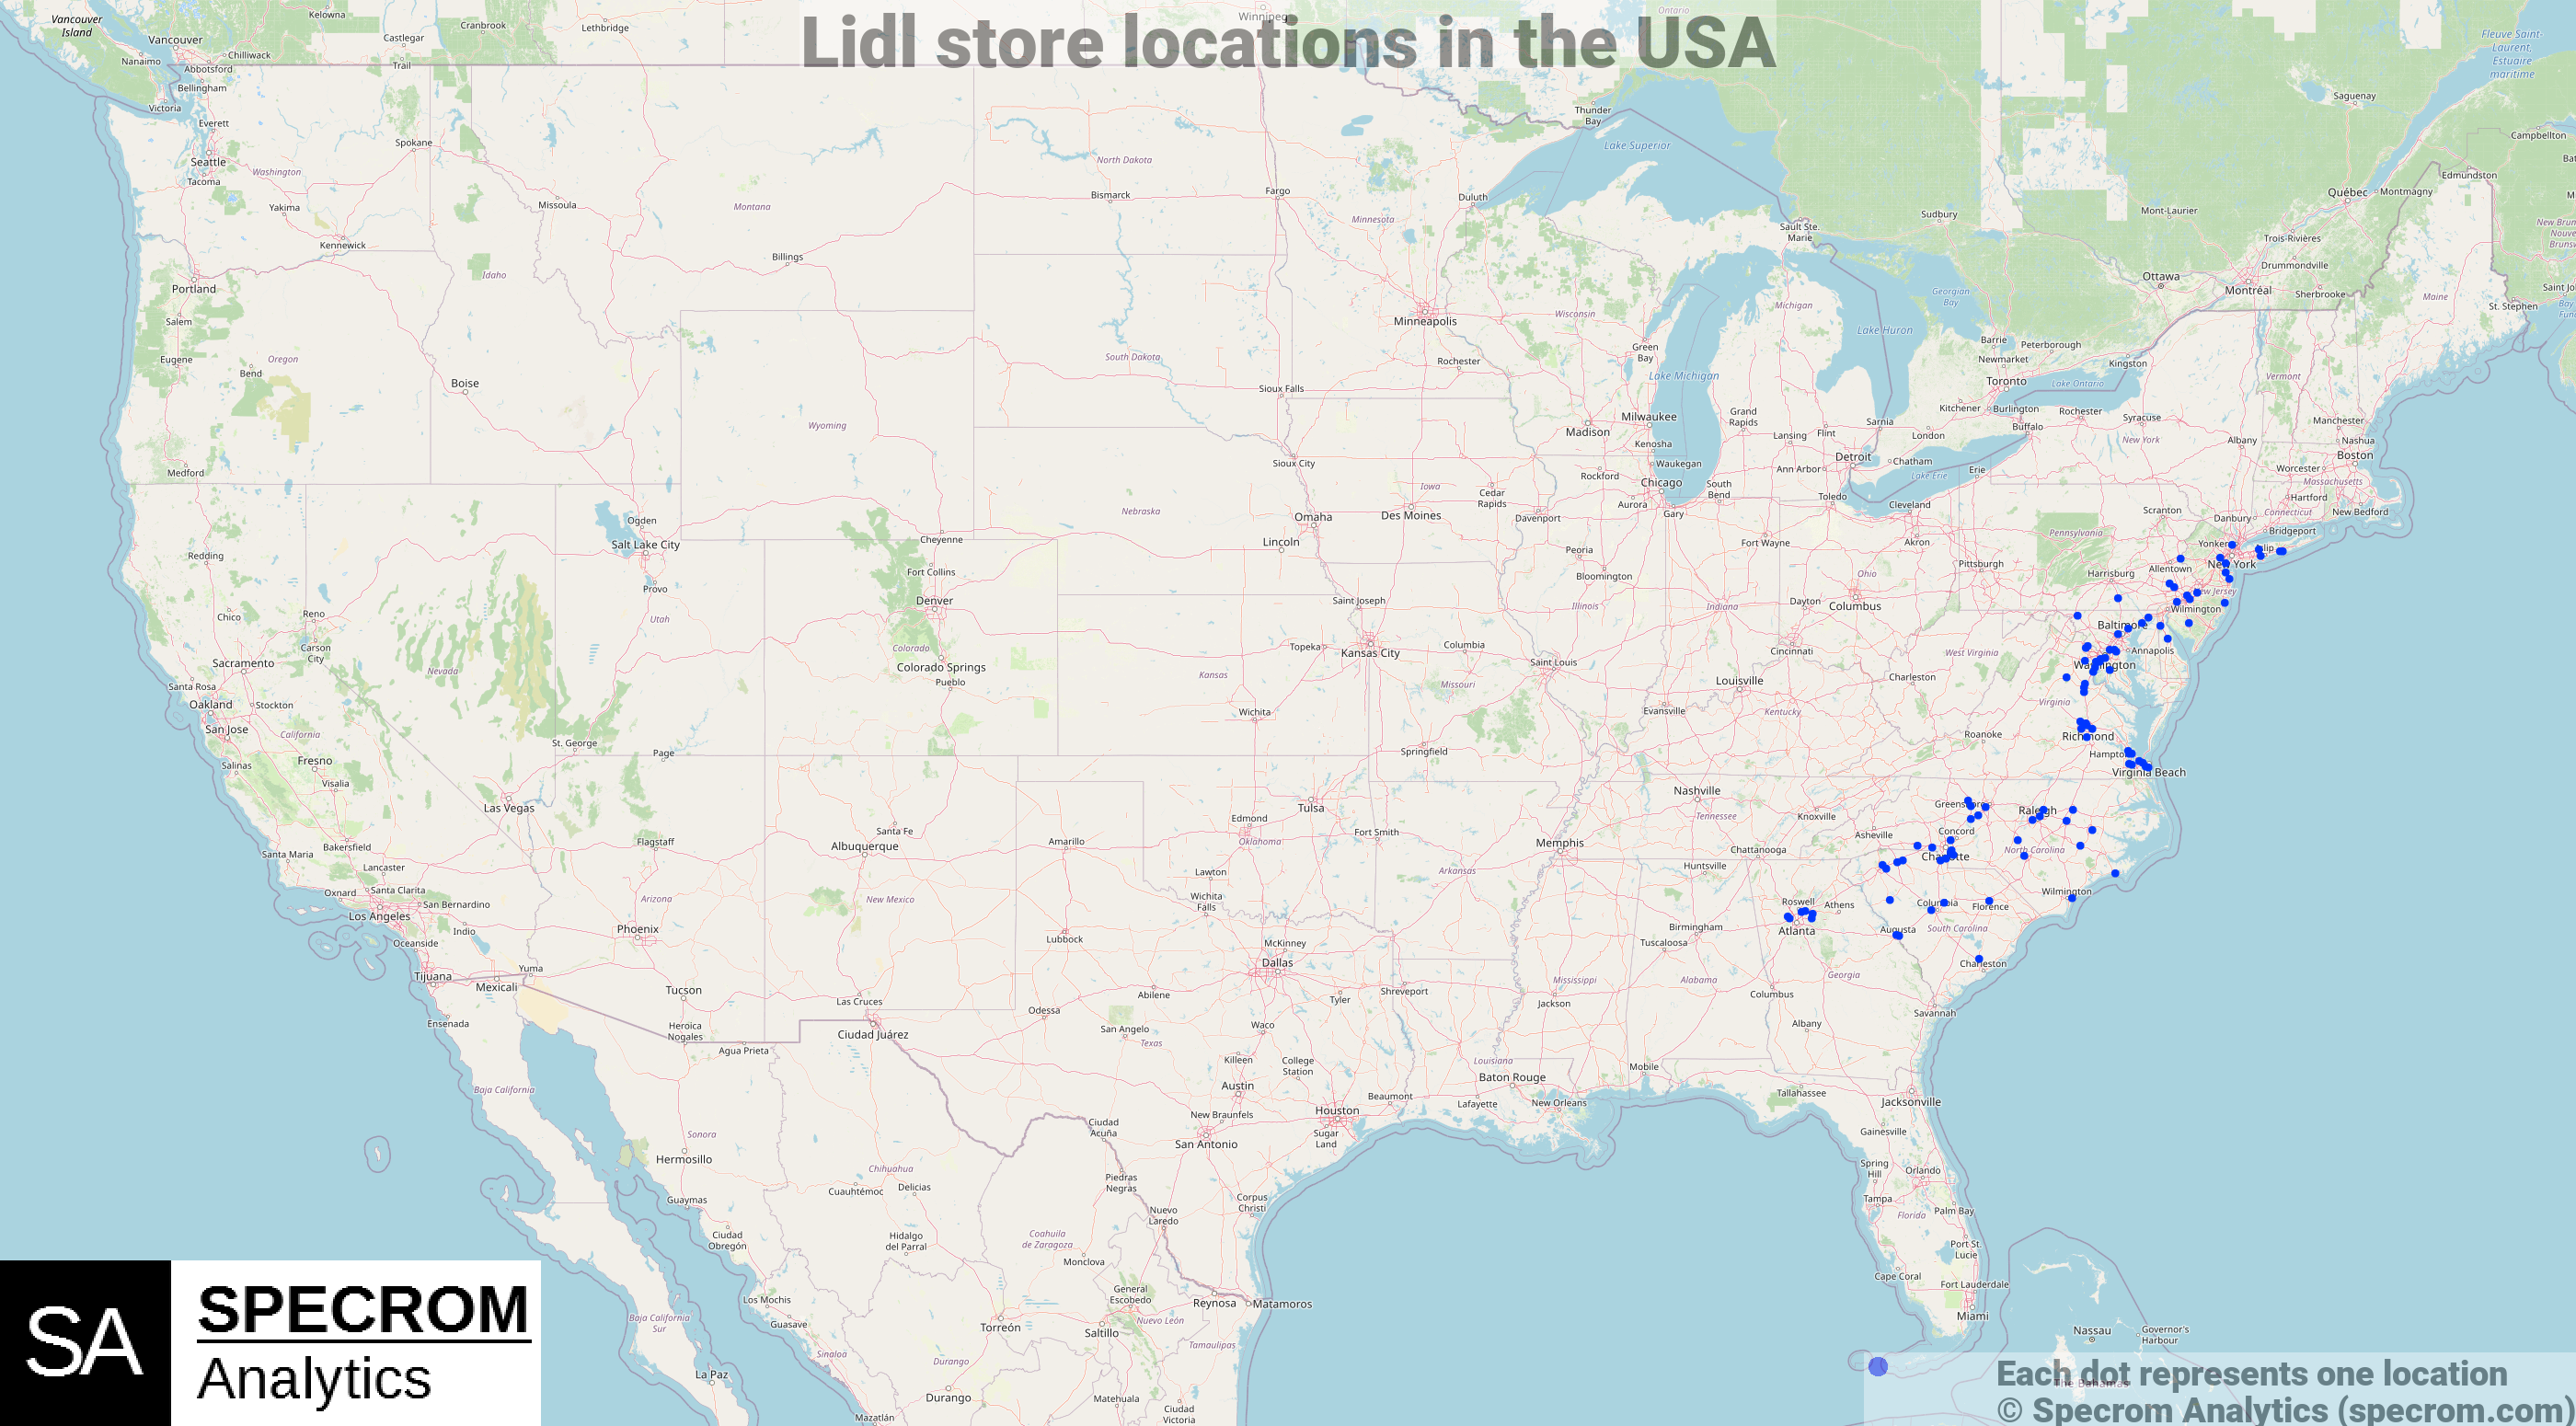 Lidl store locations in the USA